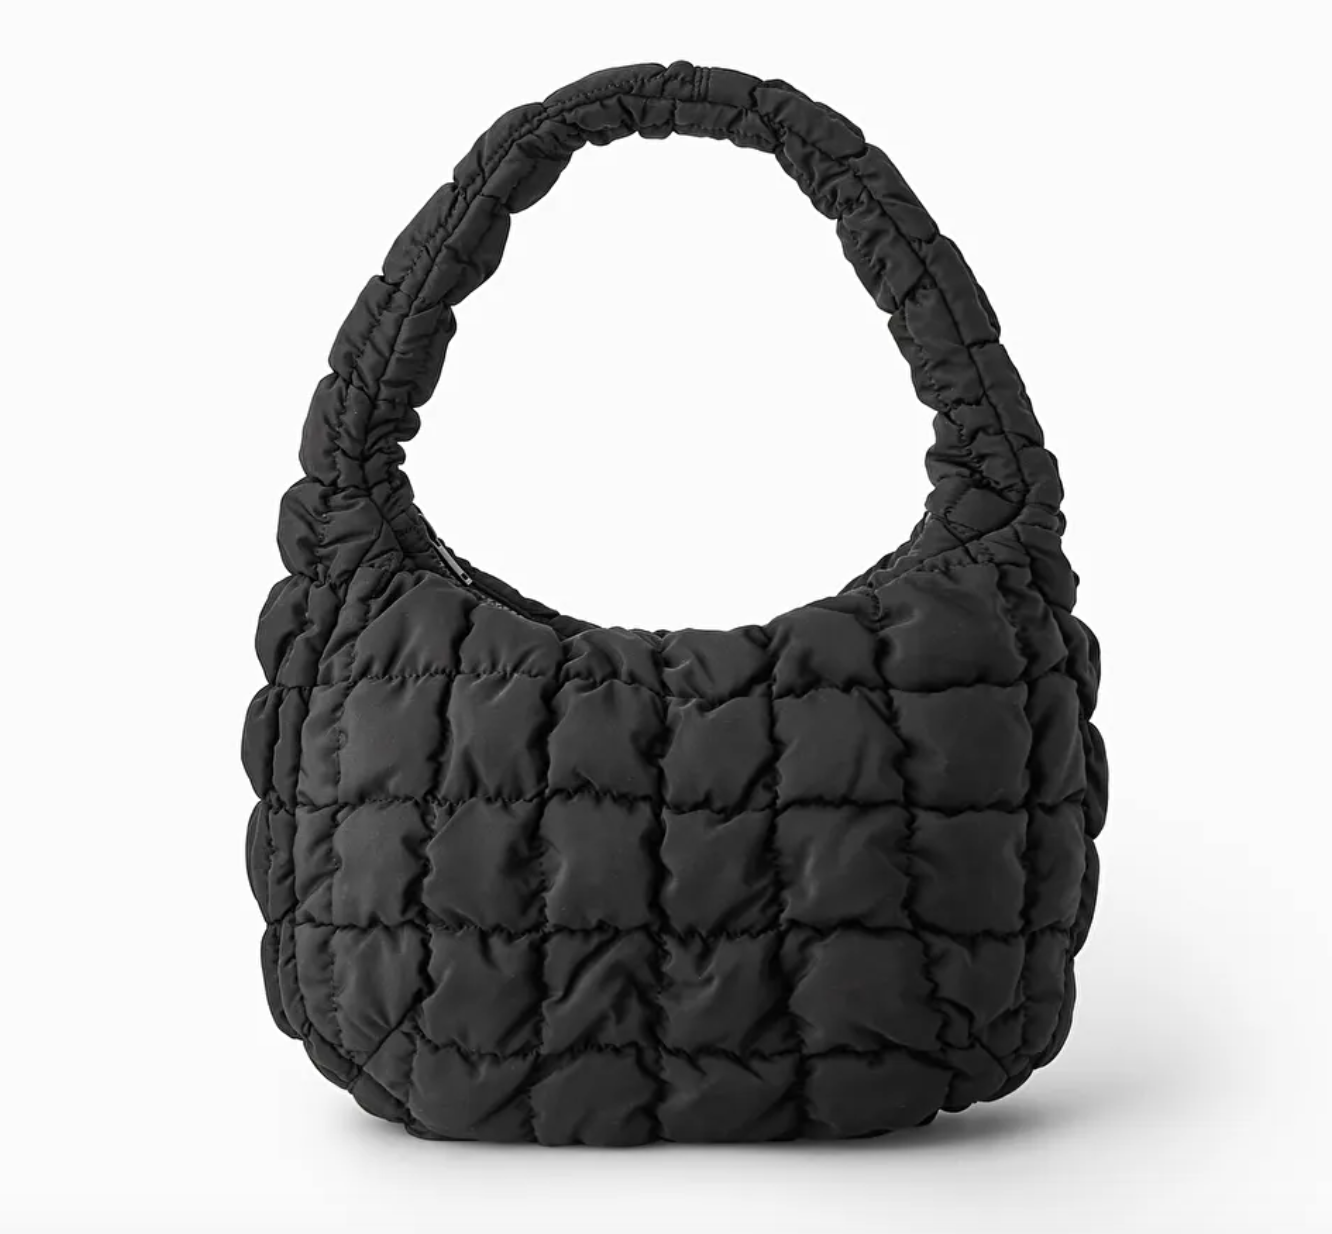 Are Quilted Bags In Style